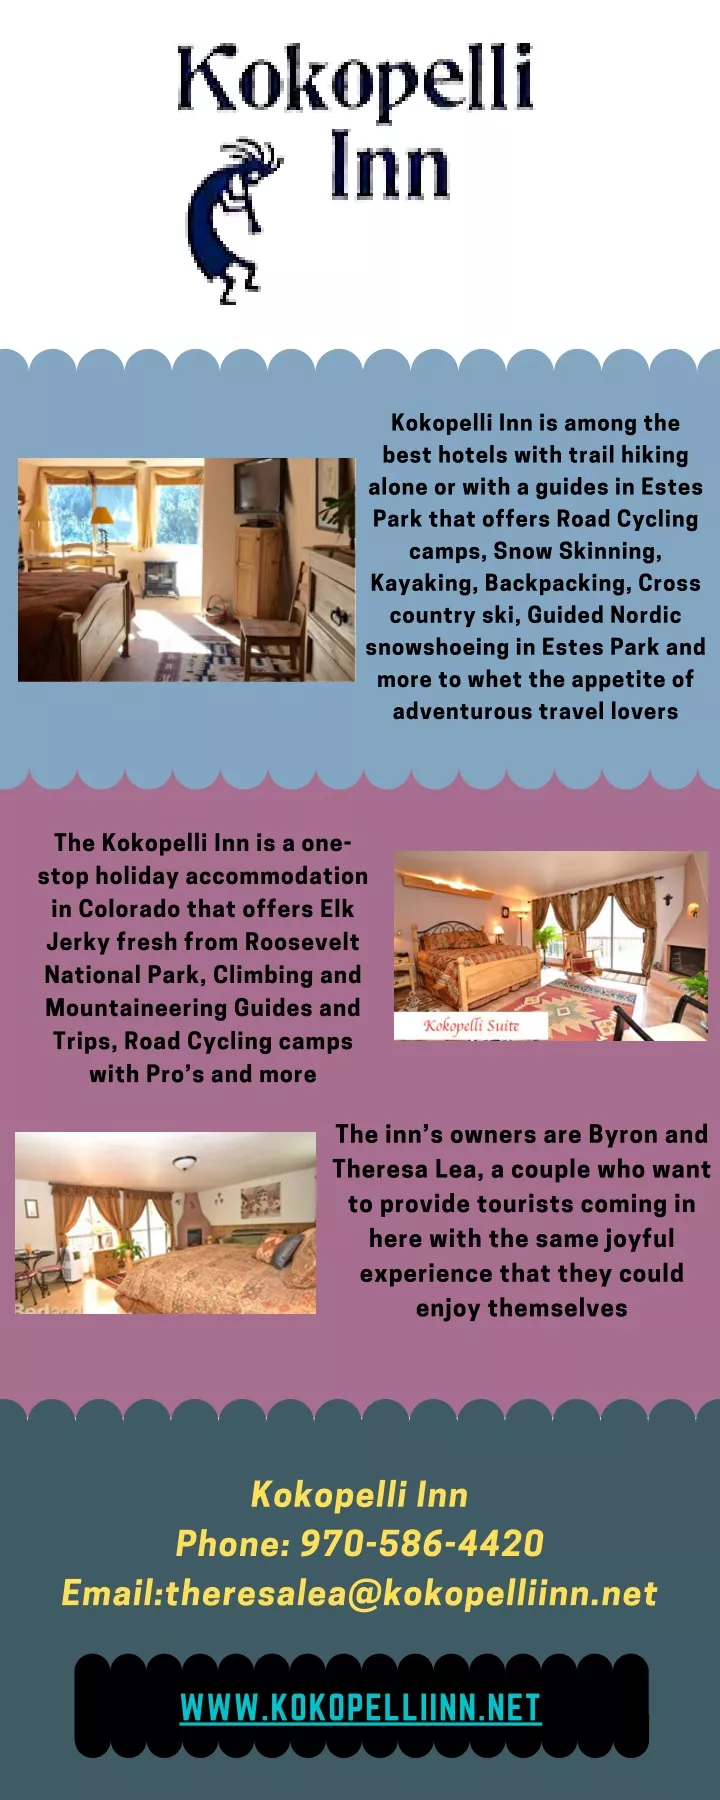 kokopelli inn is among the best hotels with trail